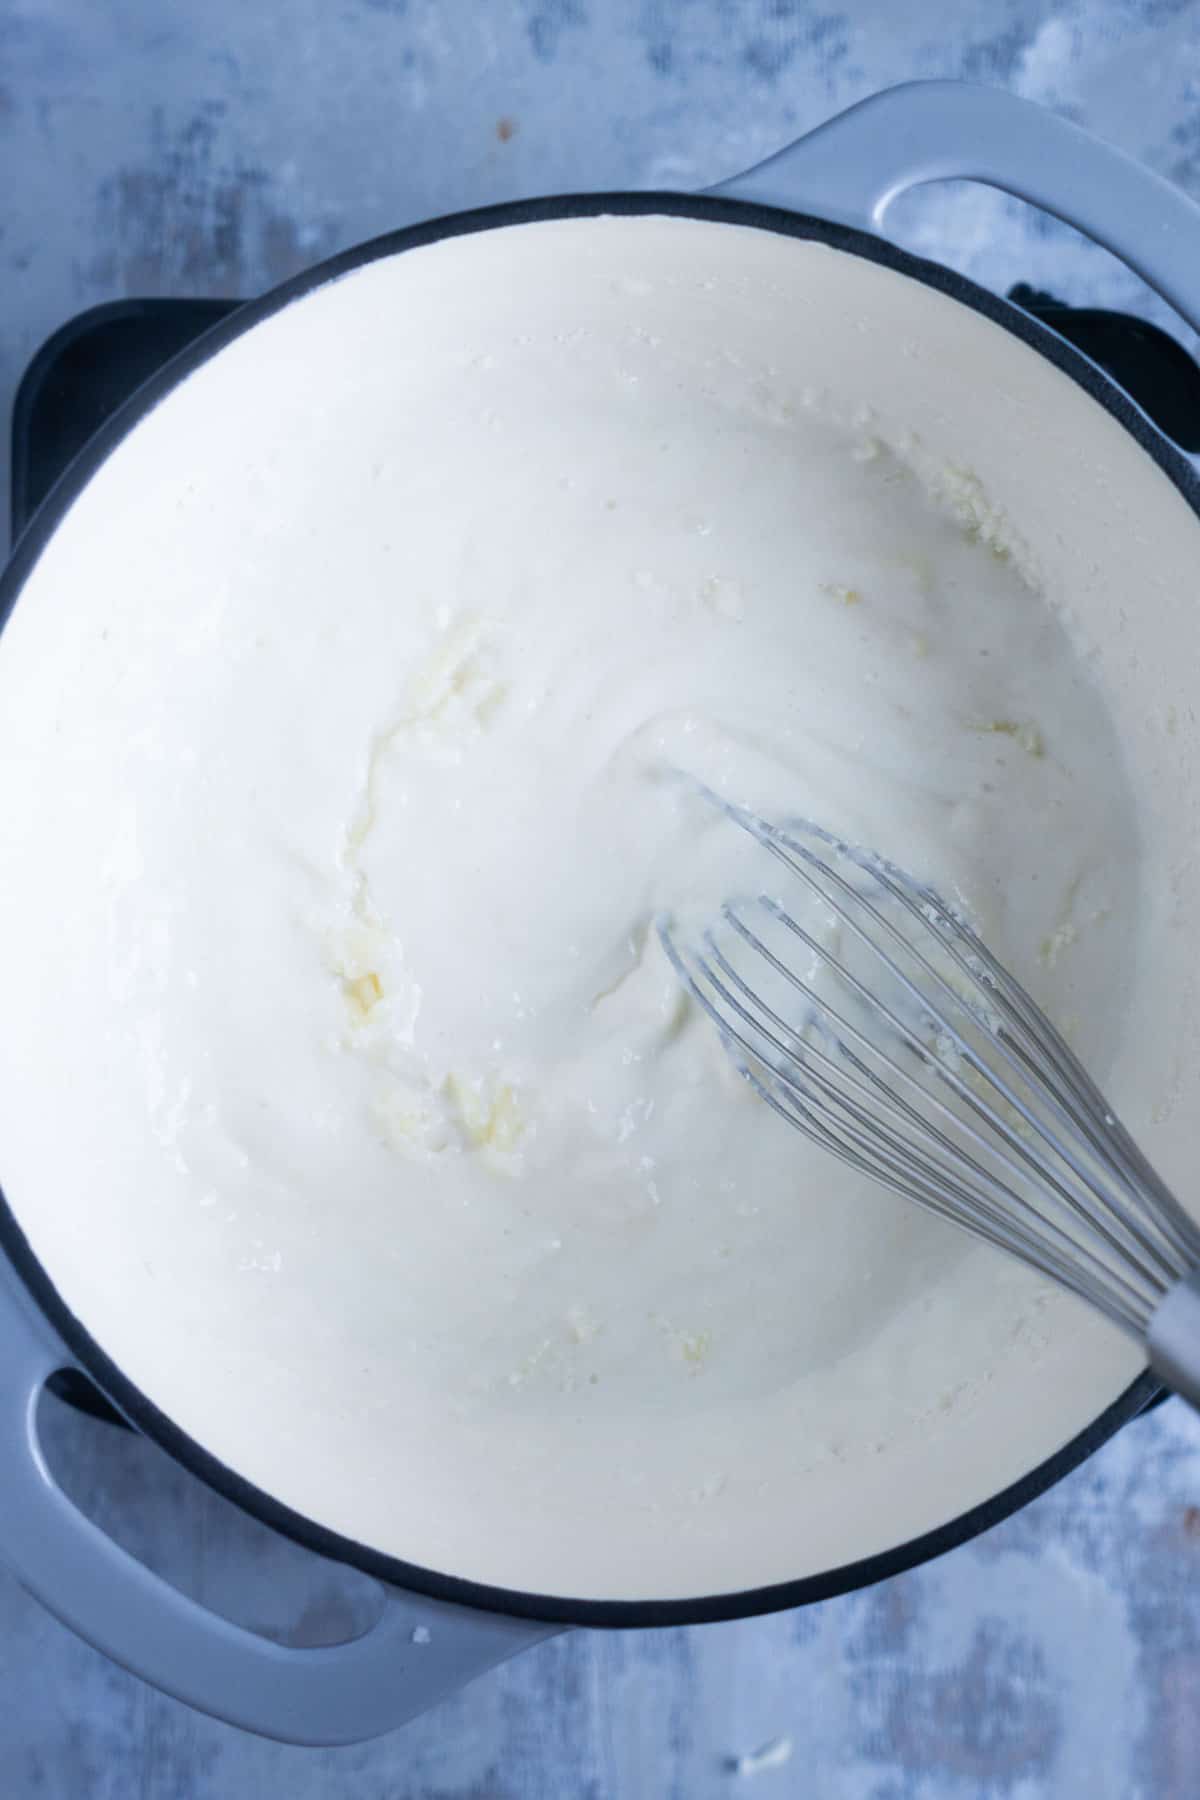 whisk stirs white cheese sauce in saucepan